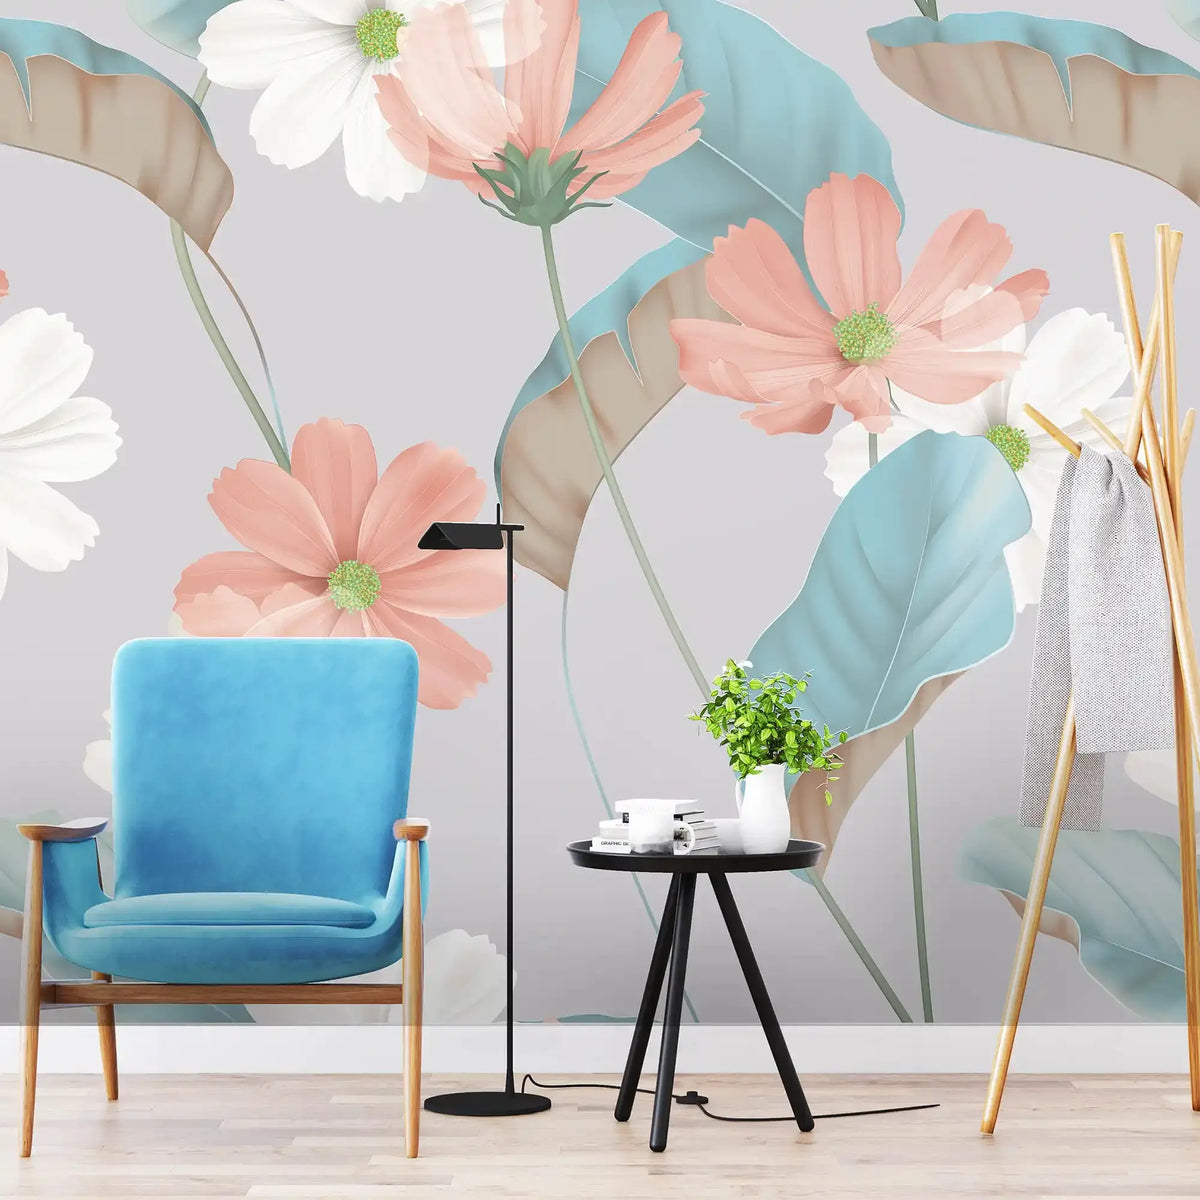 3080-B / Vibrant Boho Floral Wallpaper: Peel and Stick for Easy Application - Self Adhesive, Temporary Wall Mural for DIY Decor - Artevella